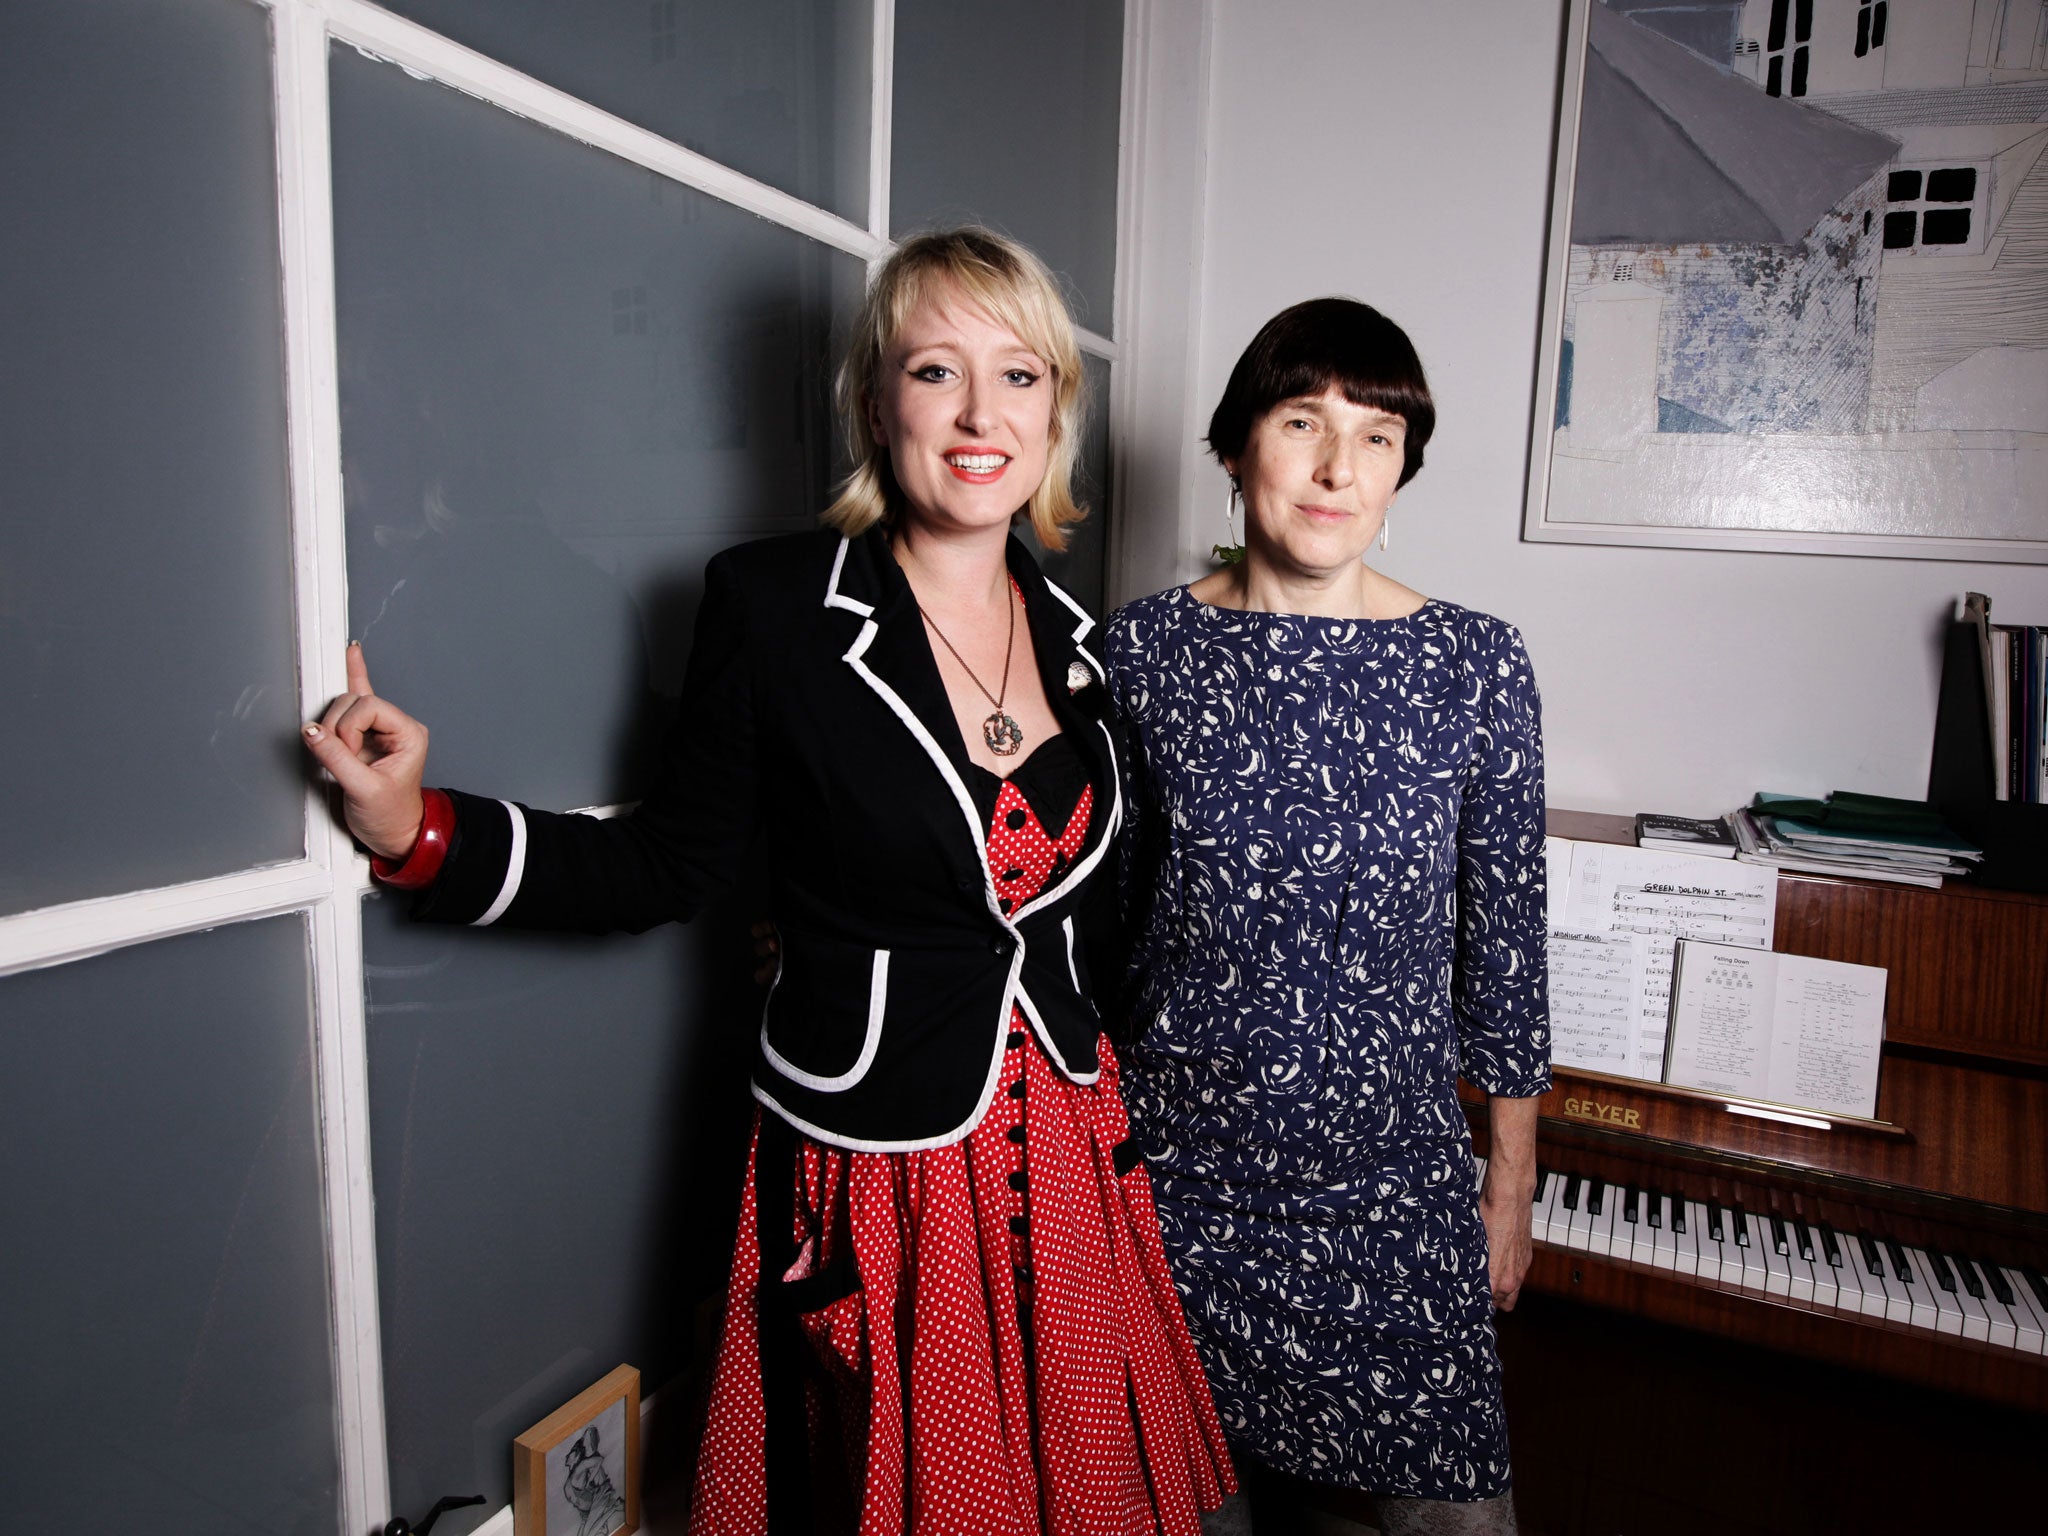 Composer Gwyneth Herbert (left, in red dress) with playwright Diane Samuels, the collaborators on the musical